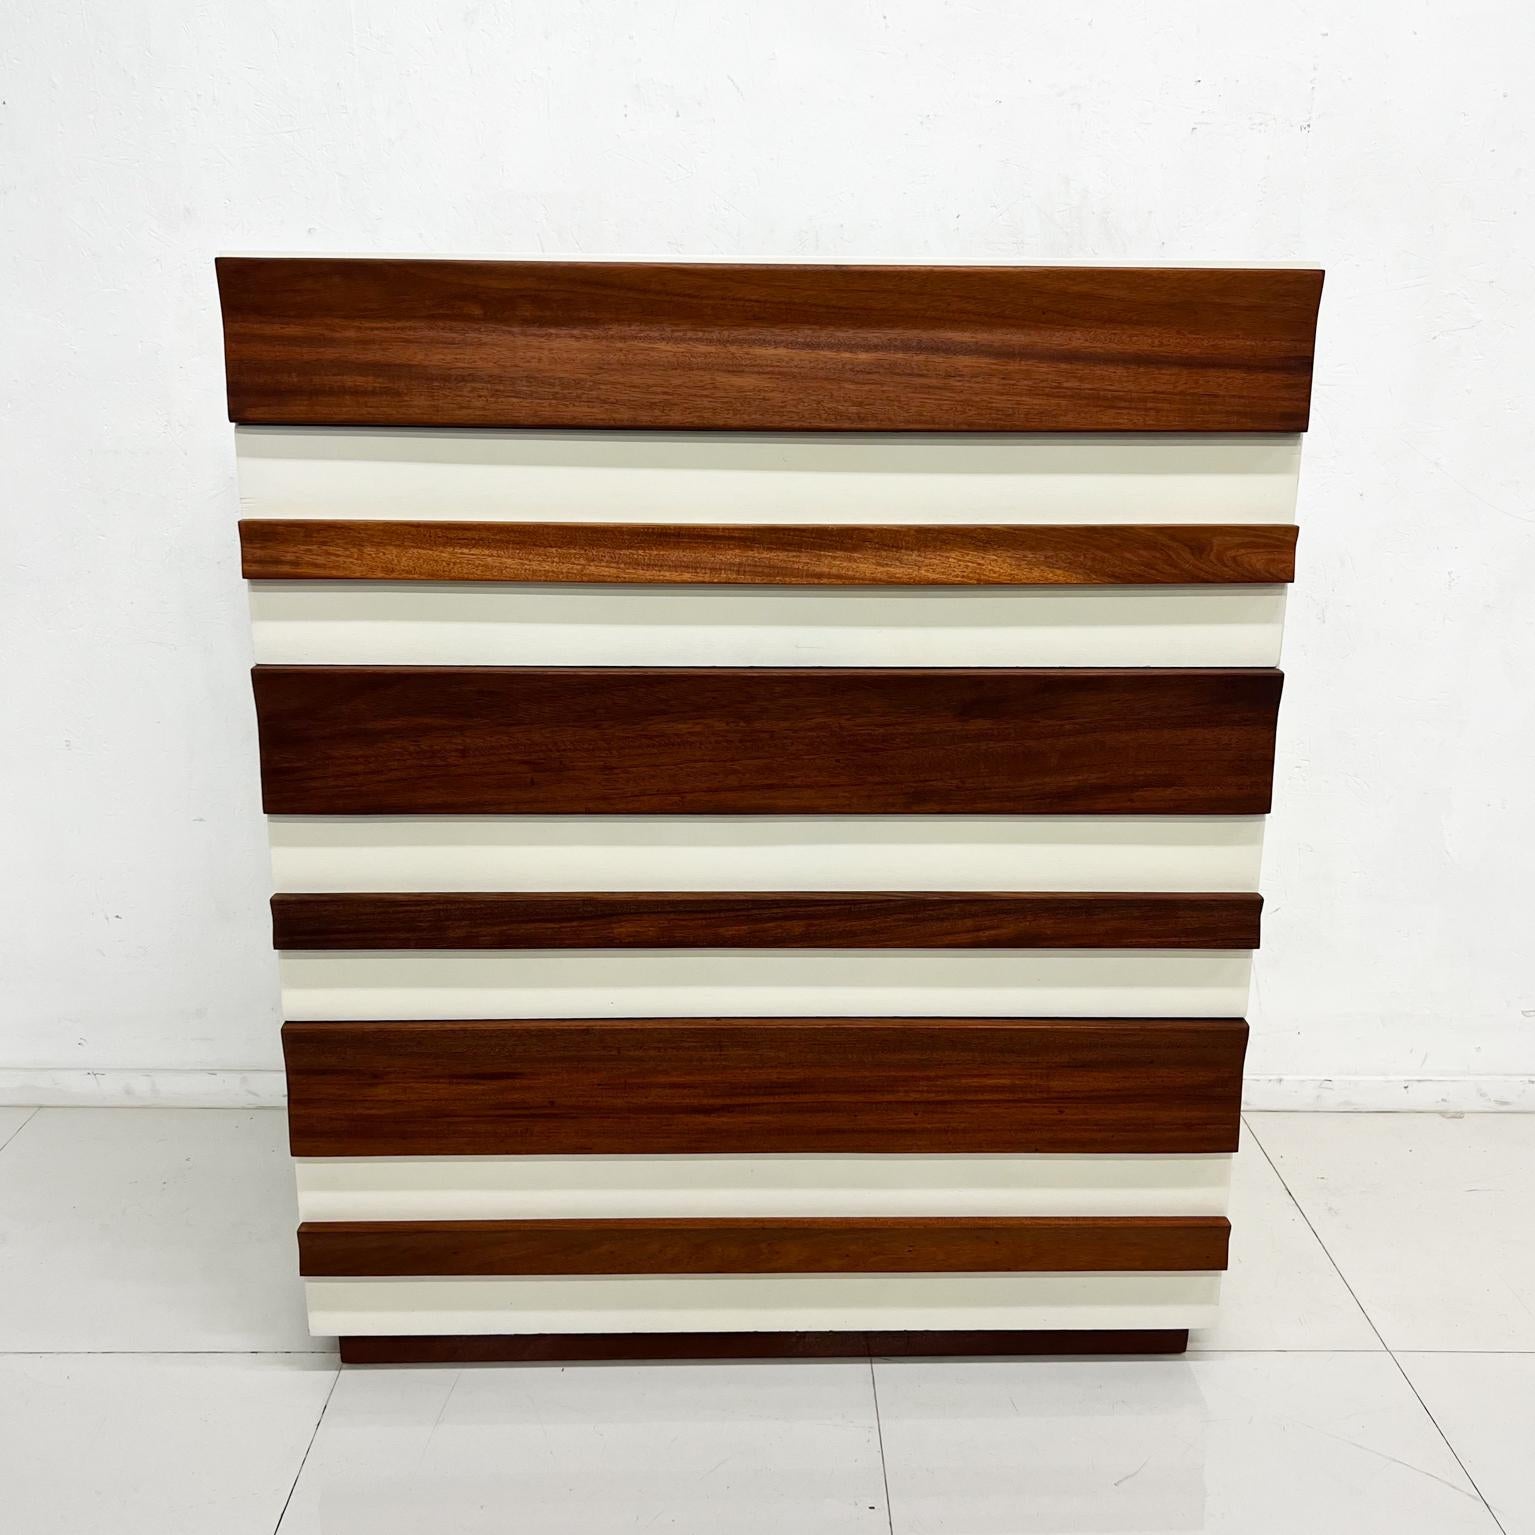 1960s Leo Bogin highboy dresser mahogany Heirloom white forest hills NY
Clean modern lines
Leo Bogin Furniture New York
Label present from upscale retail store.
40.13 w x 20 d x 47.25 tall 6 drawers: 36.75 w x 17.13 d x 4 h
Ambianic